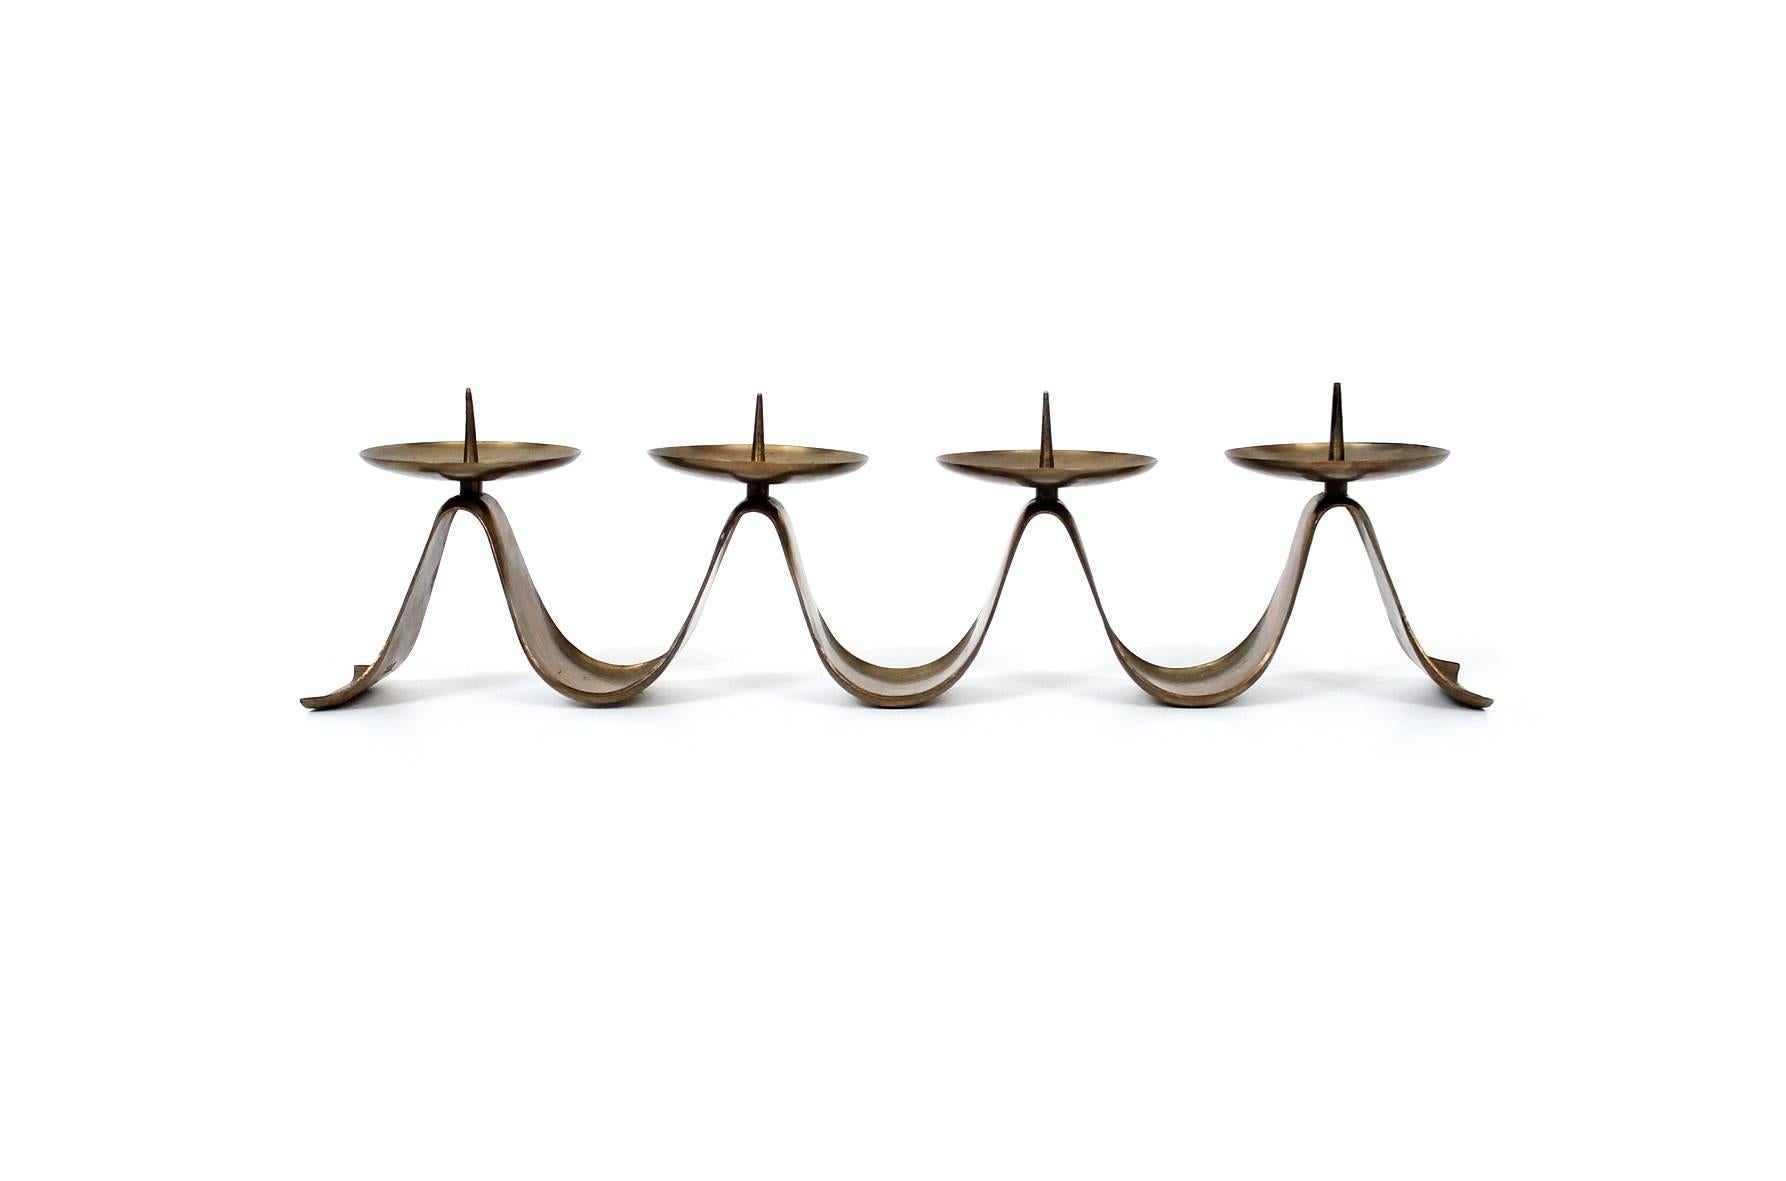 Modernist brass candelabra designed by noted German designer Hayno Focken. This design will accommodate four larger candles. Signed with Focken's conjoined HF mark.

____

We're offering our customers free domestic shipping on all items during the